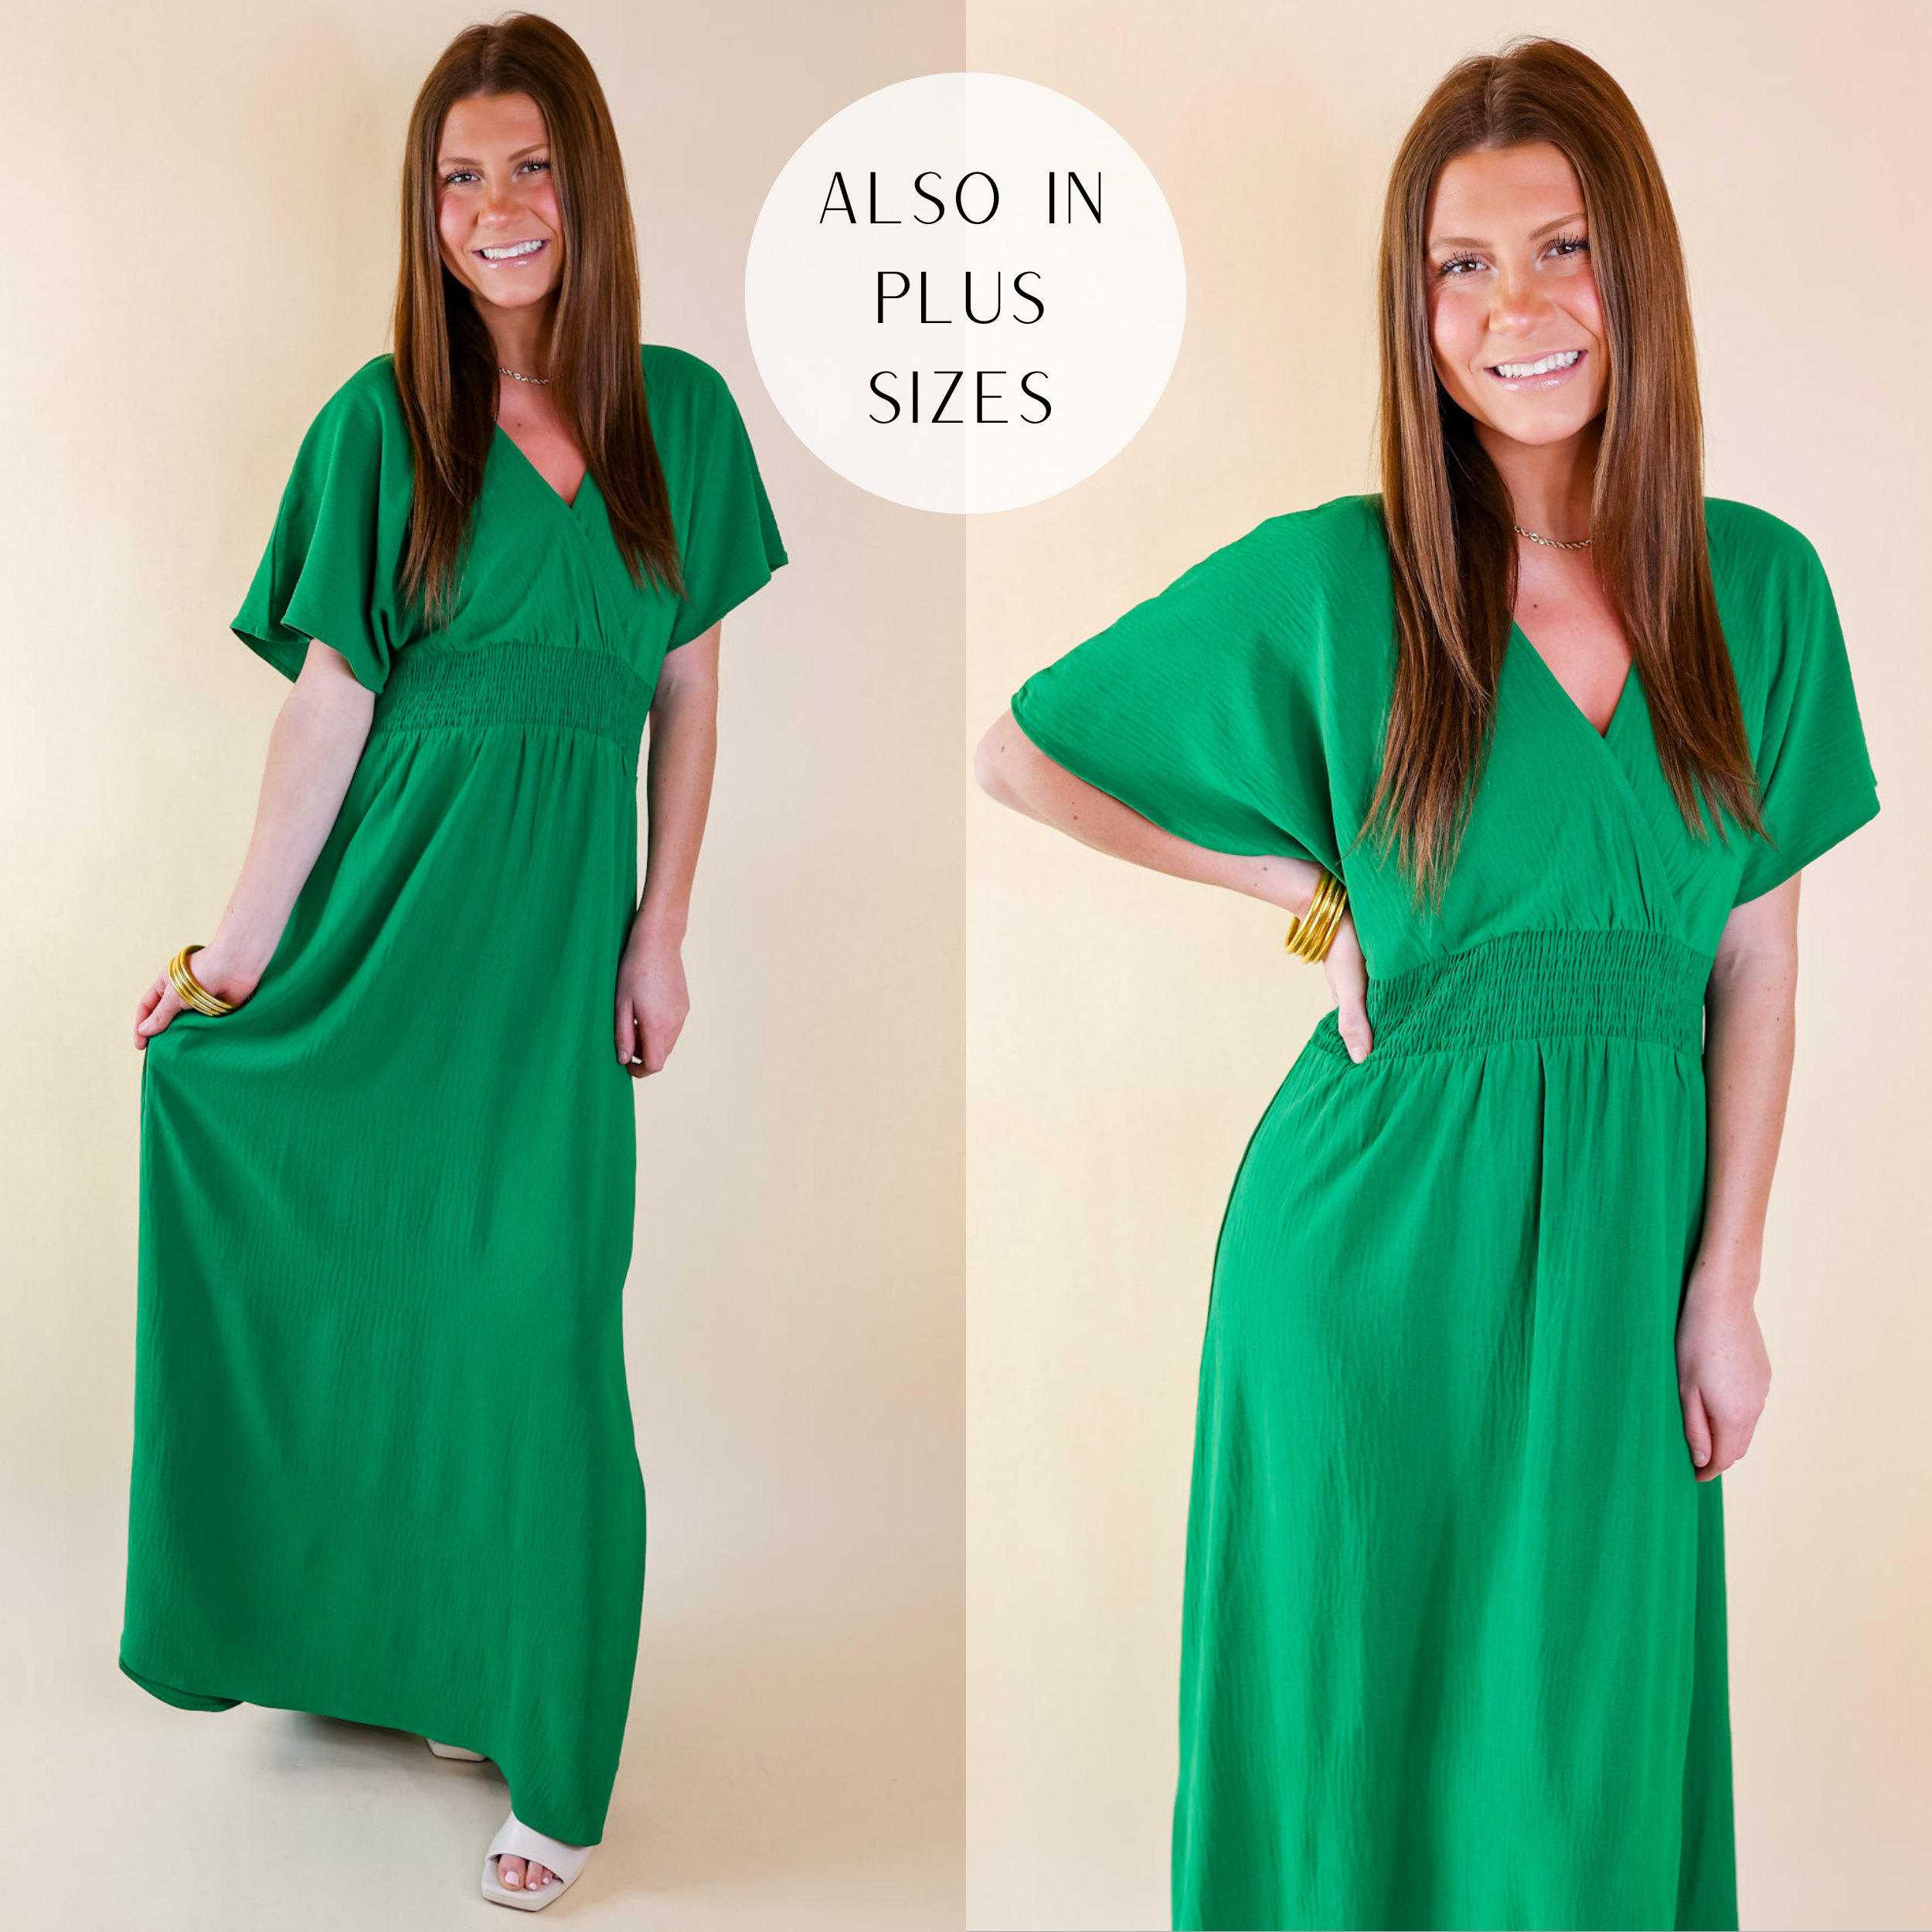 Model is wearing a green maxi dress with short sleeves, a v neckline, and a smocked waist. Model has it paired with white heels and gold jewelry.